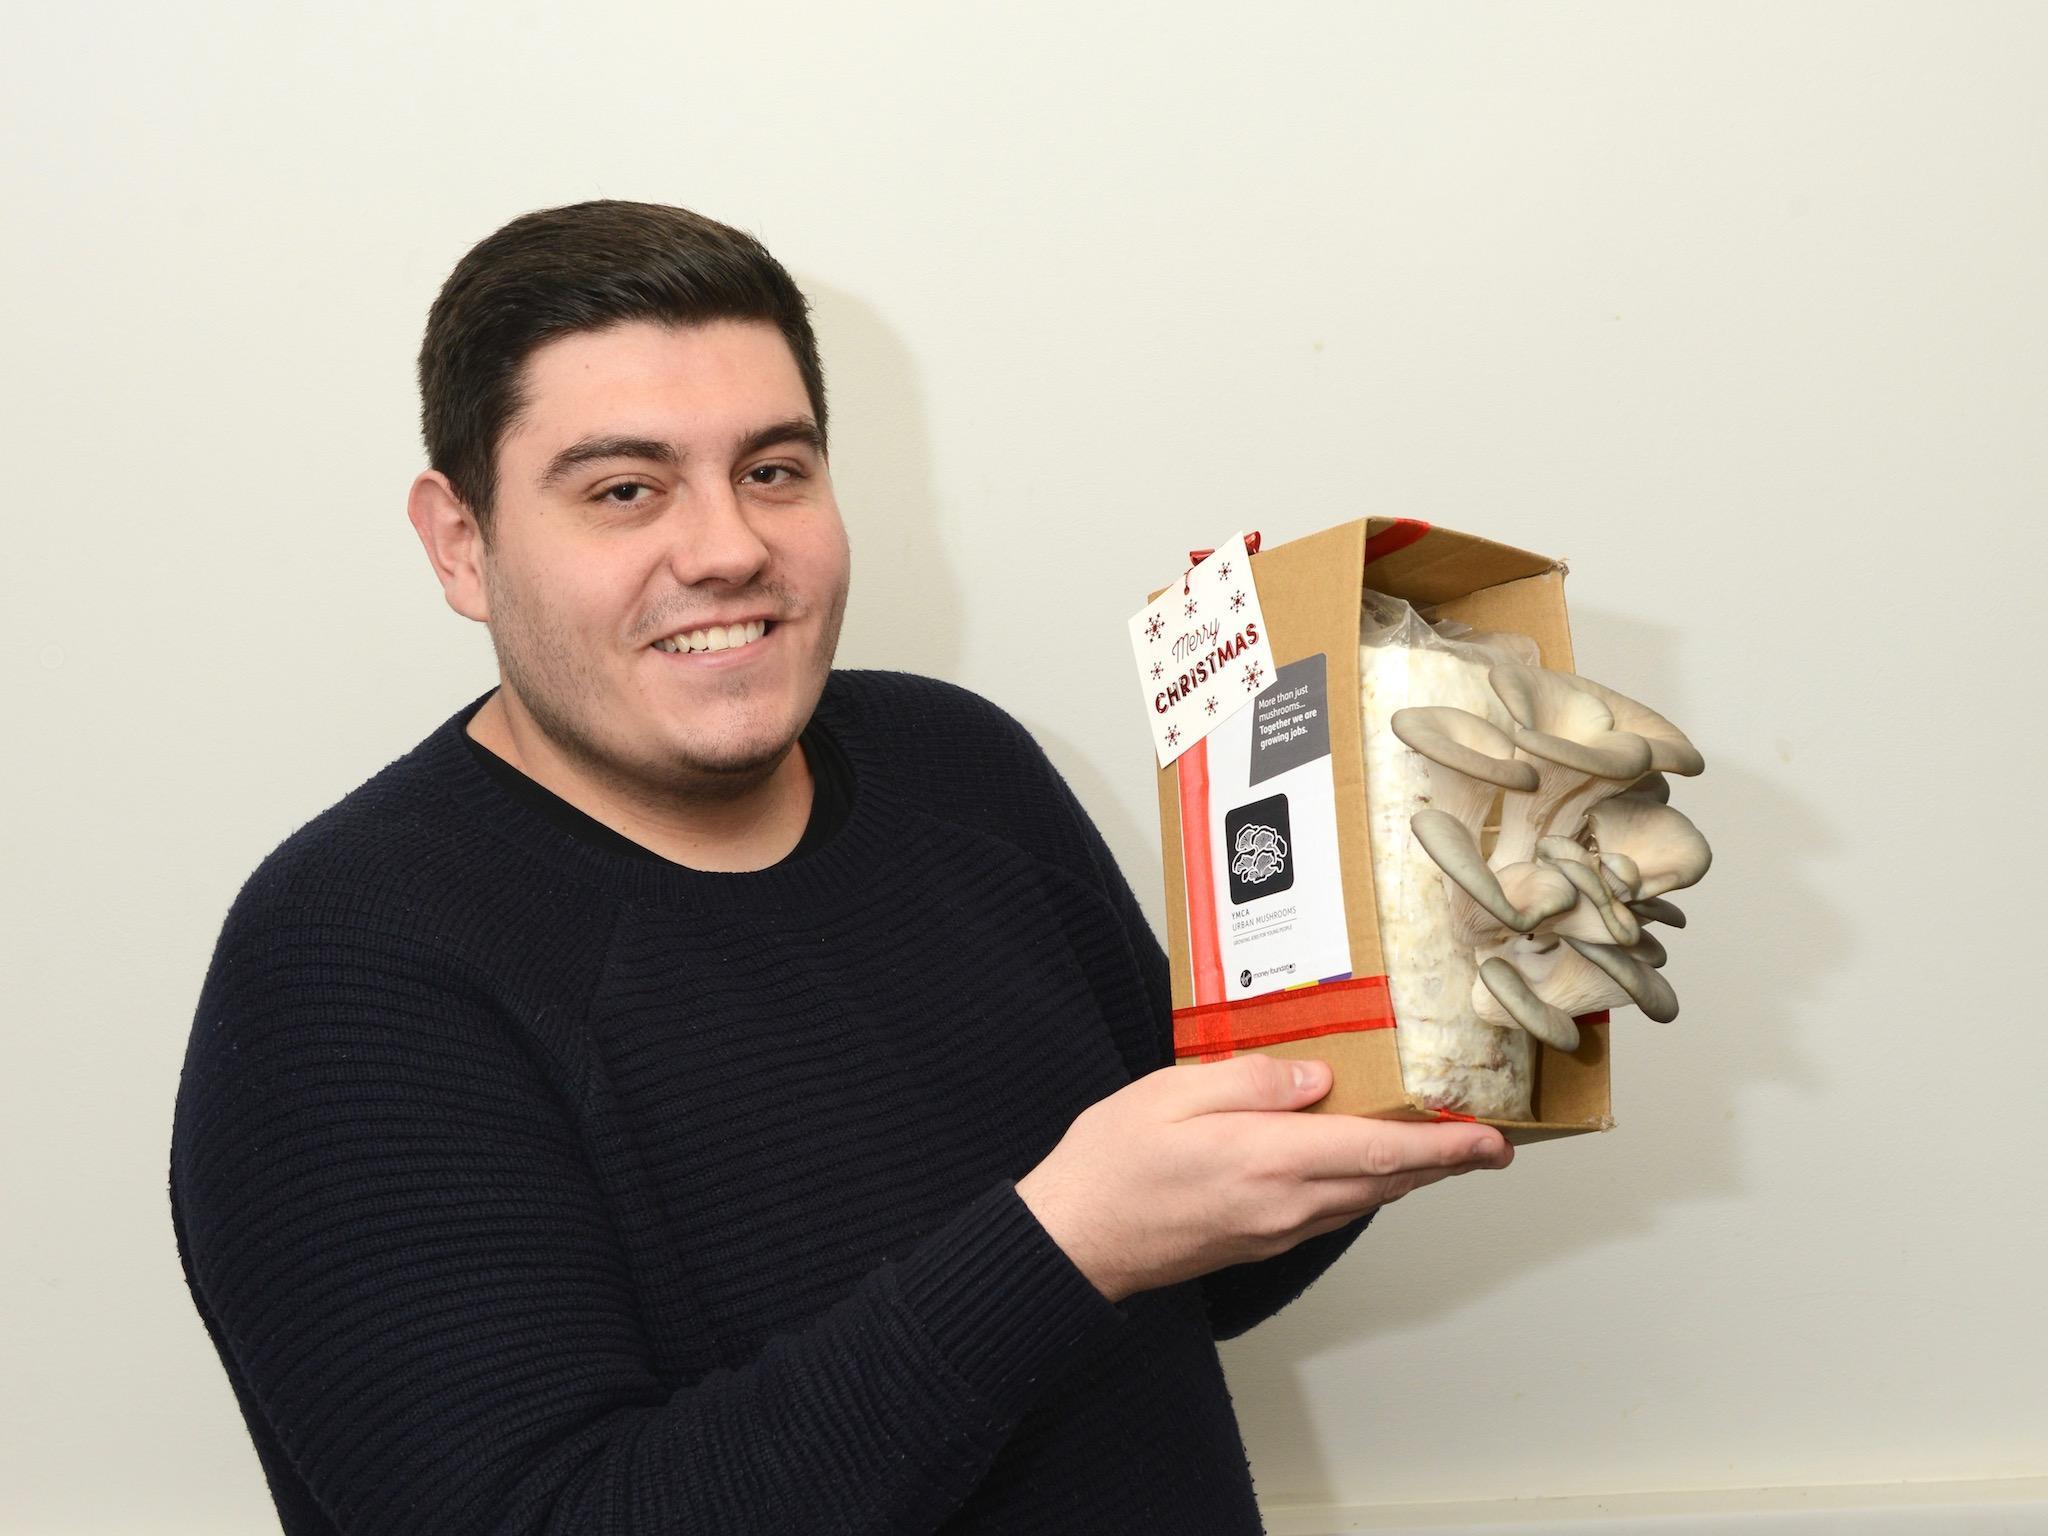 Calvin has been working at YMCA Newcastle as a digital marketing apprentice for 18 months